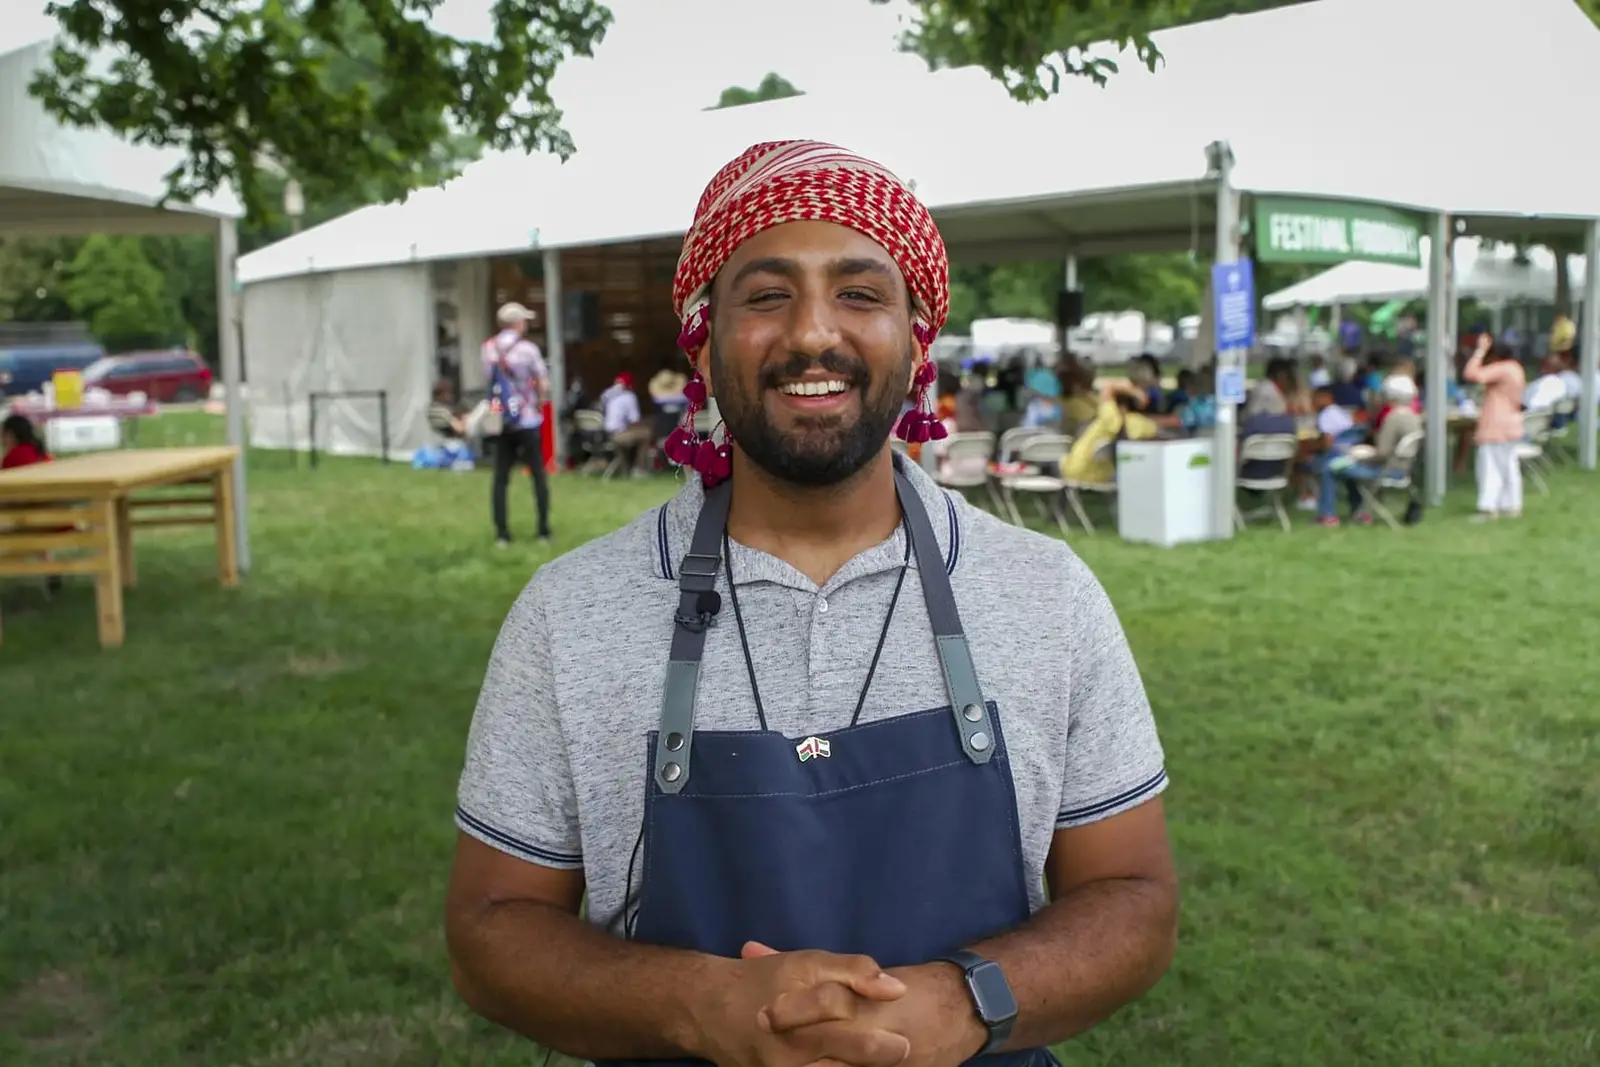 Smiling man wearing a red head covering and a blue chef's apron standing in front of a tent with a crowd gathered underneath